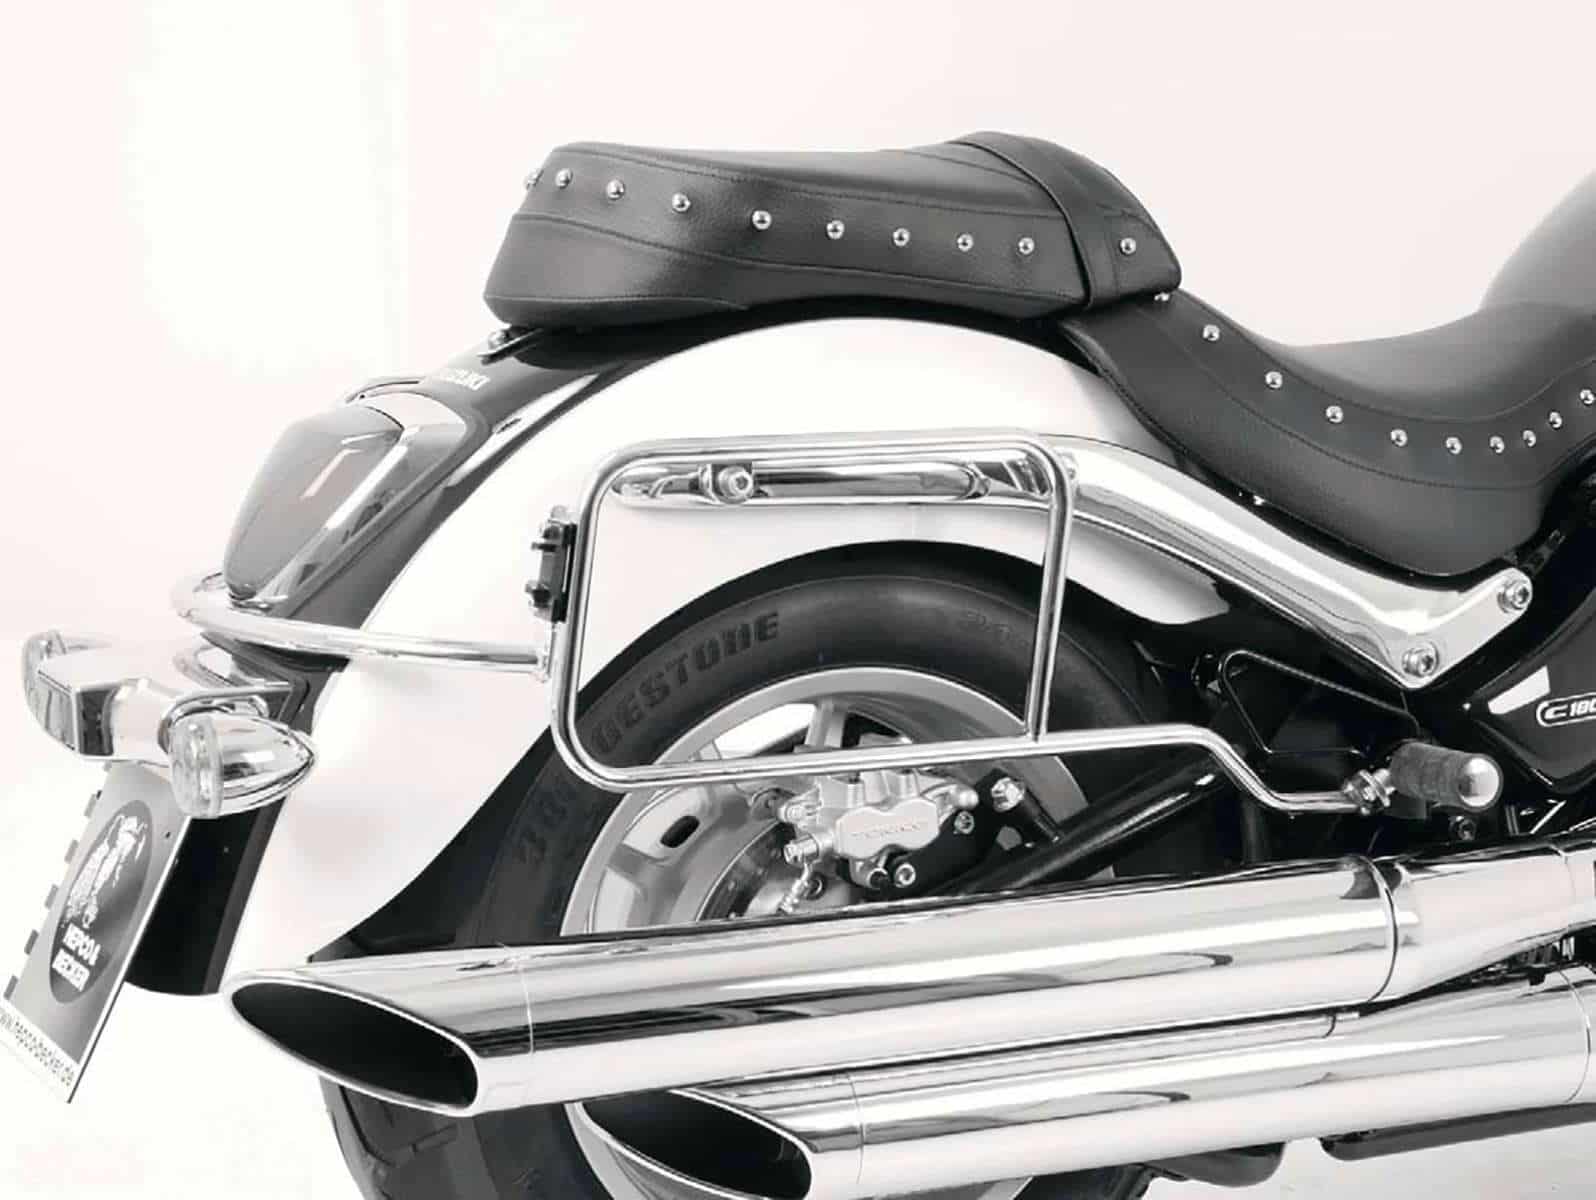 Sidecarrier permanent mounted chrome for Suzuki C 1800 (VL) R (2011-2013)